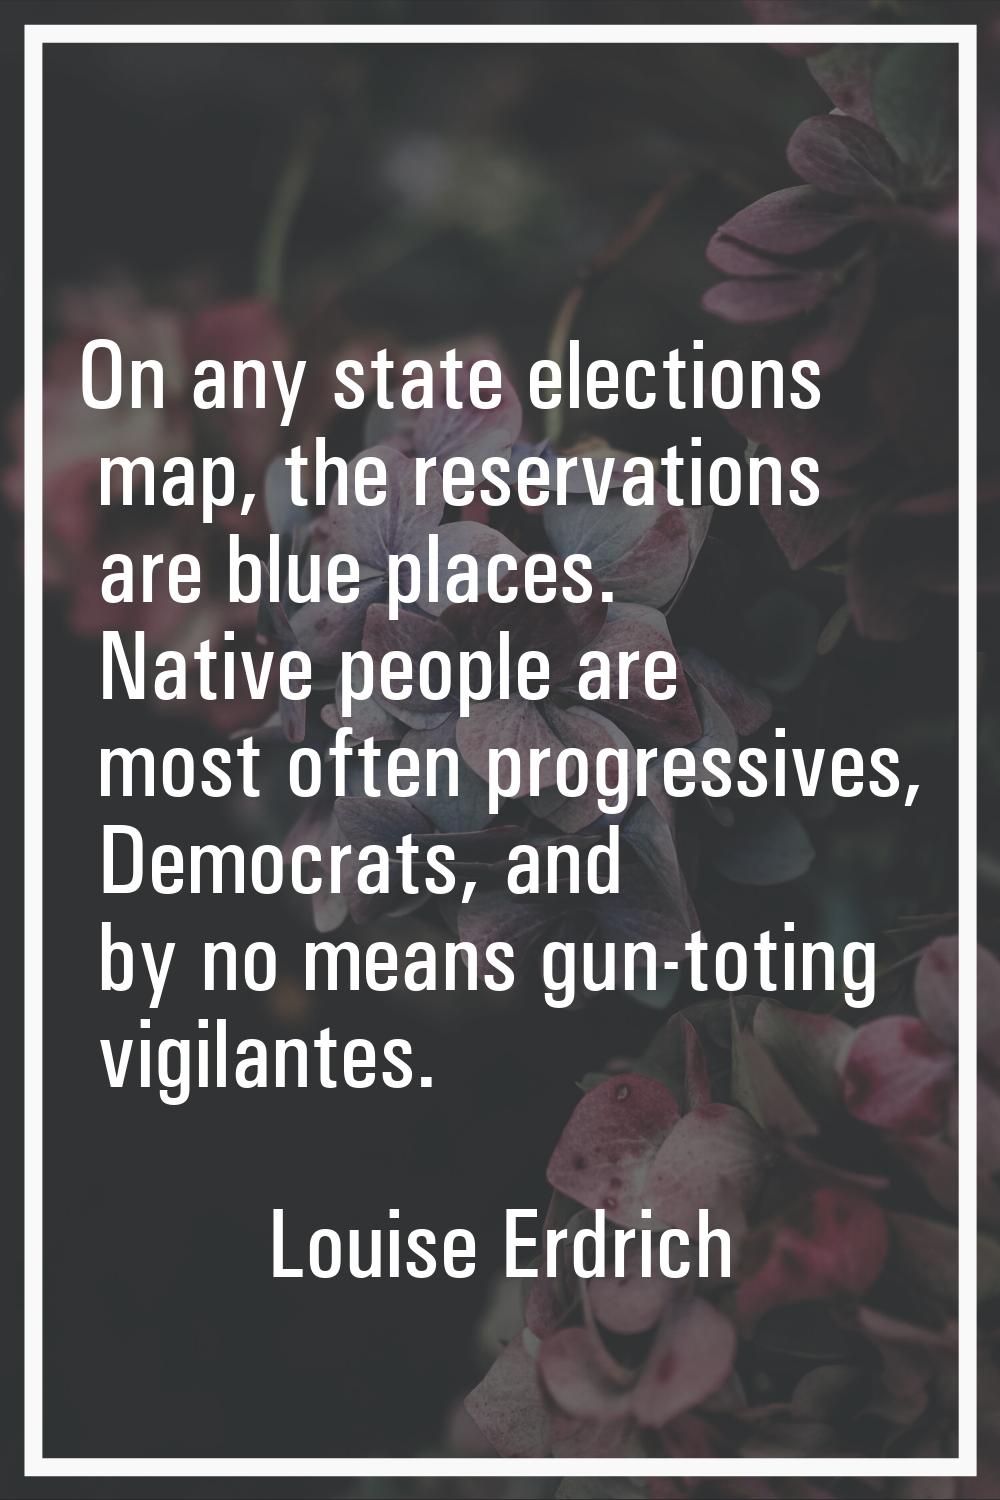 On any state elections map, the reservations are blue places. Native people are most often progress